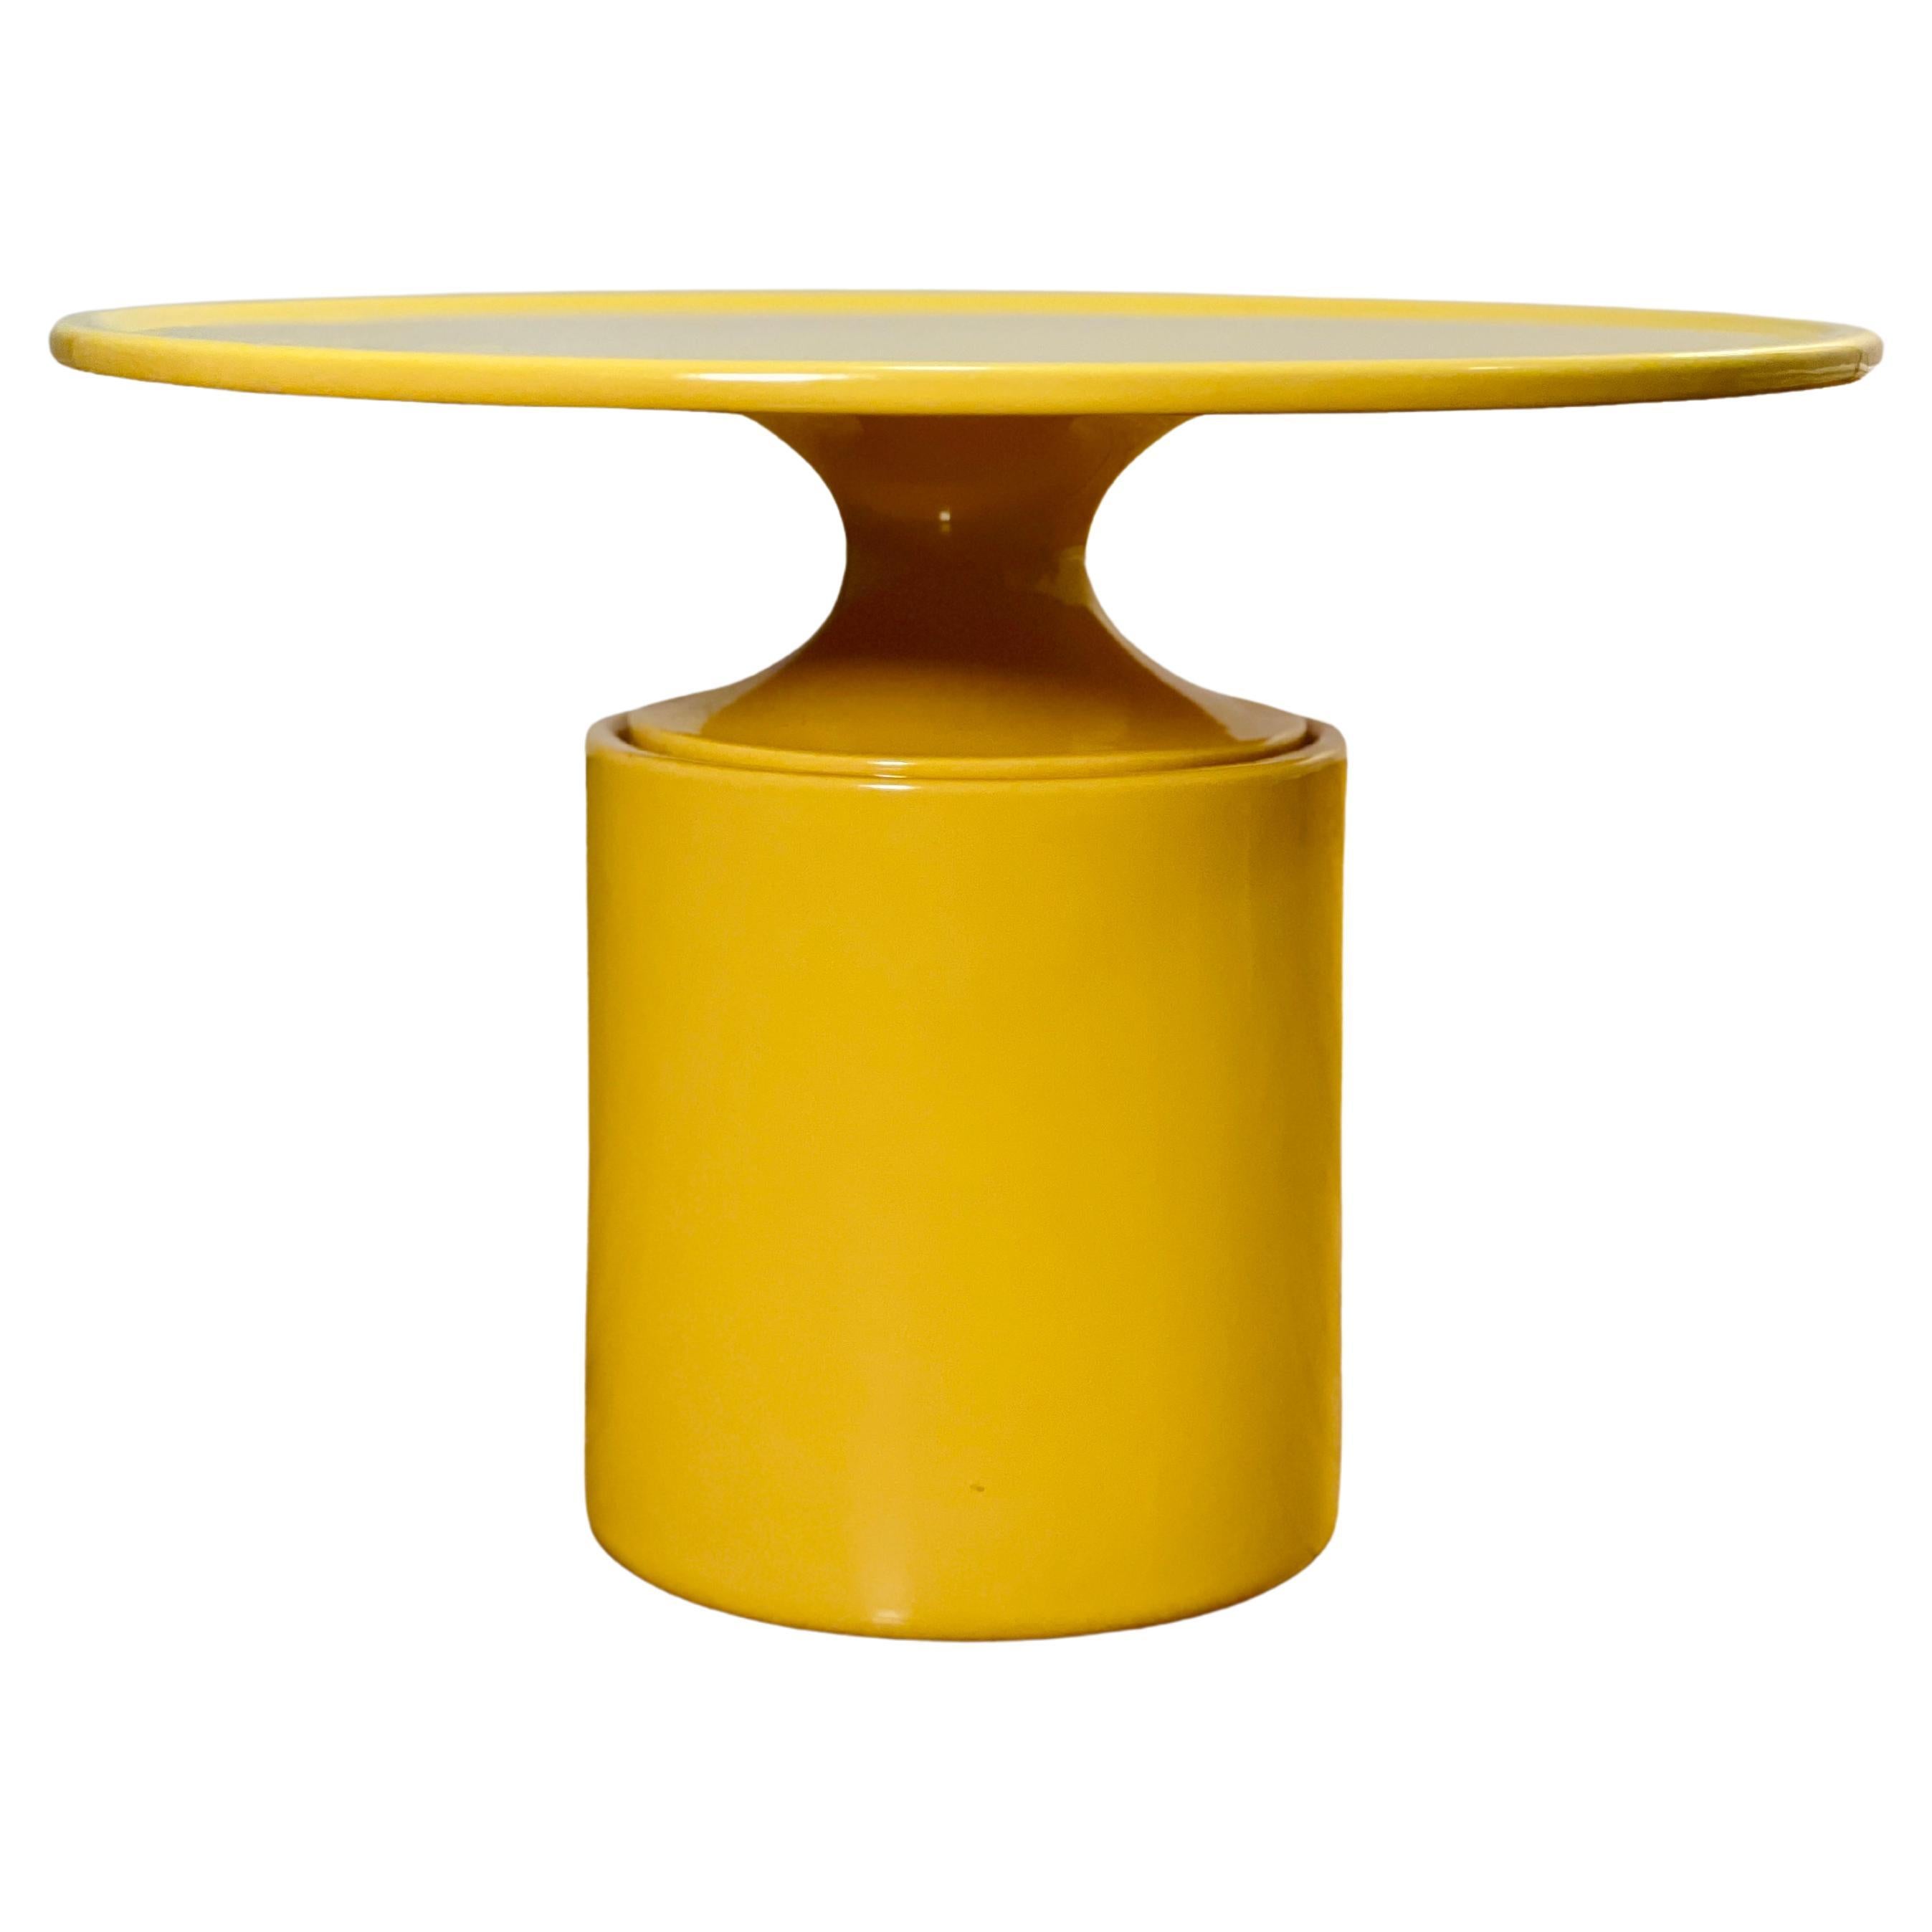 Table d'appoint jaune Christophe Delcourt 